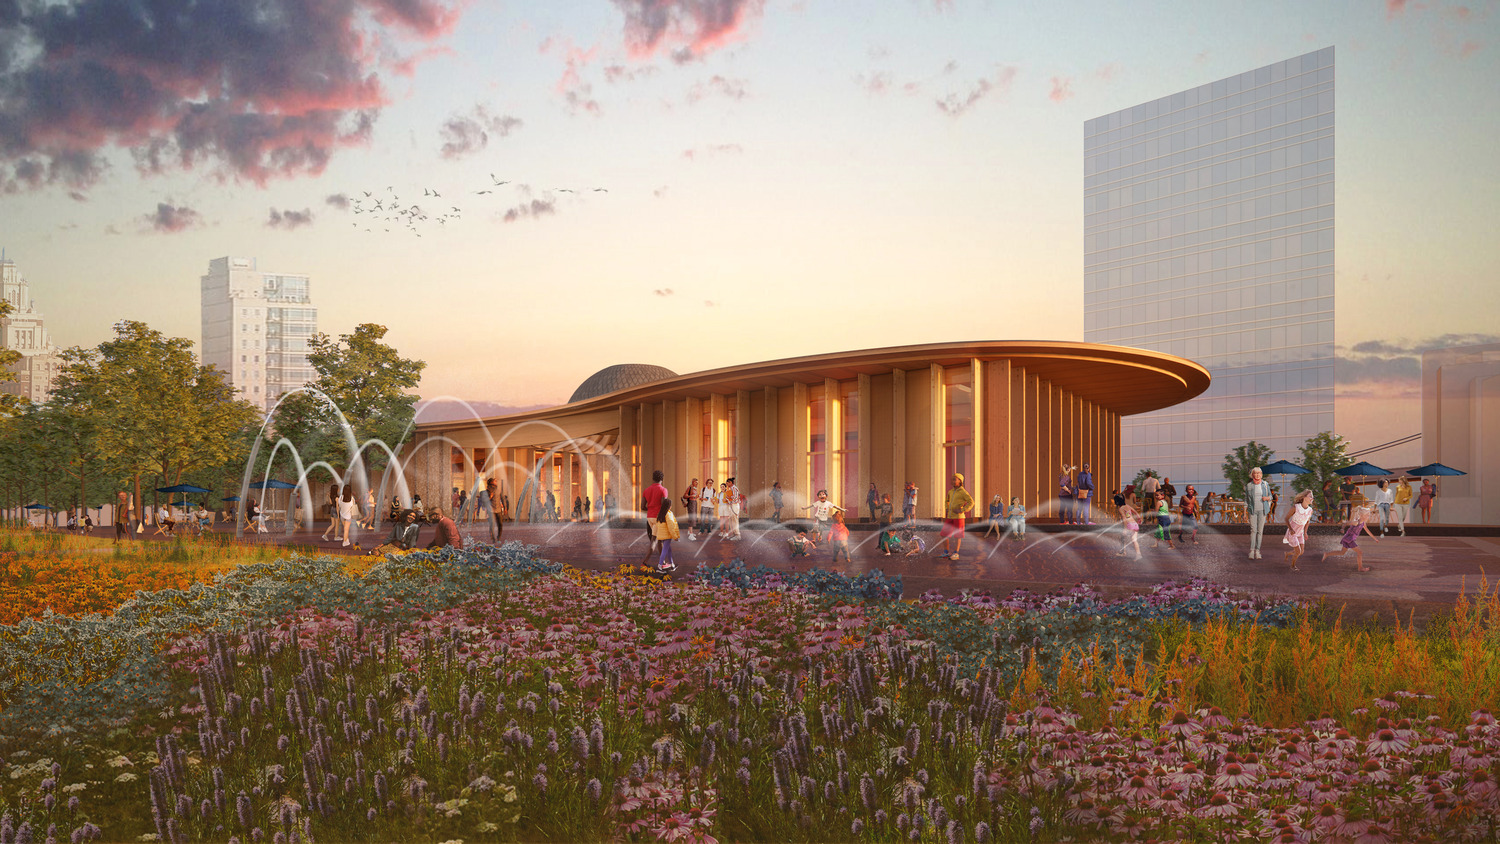 <p>The Penn's Landing Pavilion is projected to be Philadelphia's first mass timber and zero carbon structure for public use.&nbsp;<br /><small>&copy; KieranTimberlake</small></p>